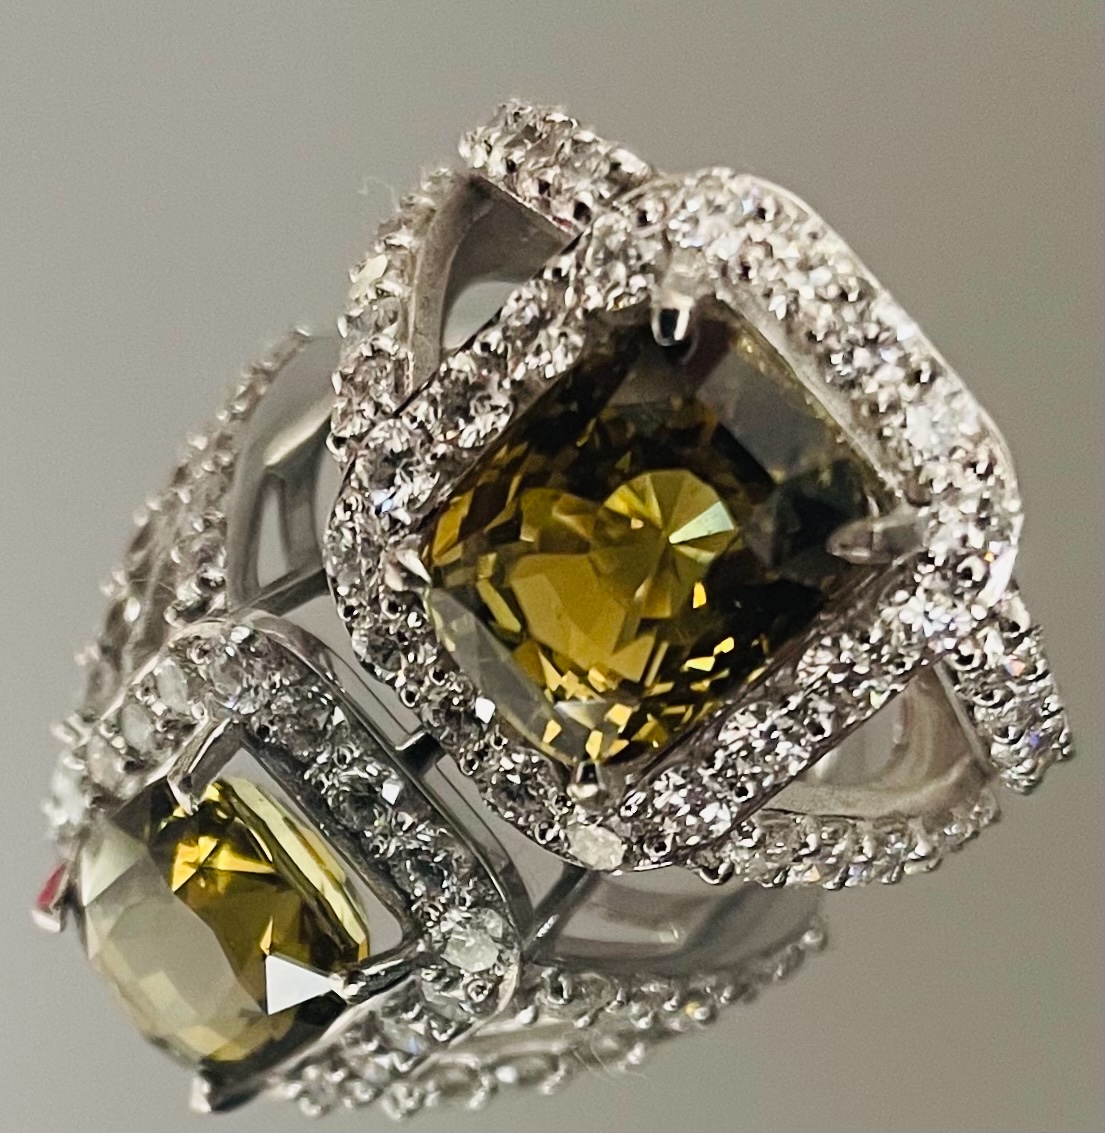 4.17Ct Natural Alexandrite Ring Unheated/Untreated with Diamonds & 18k Gold - Image 6 of 9